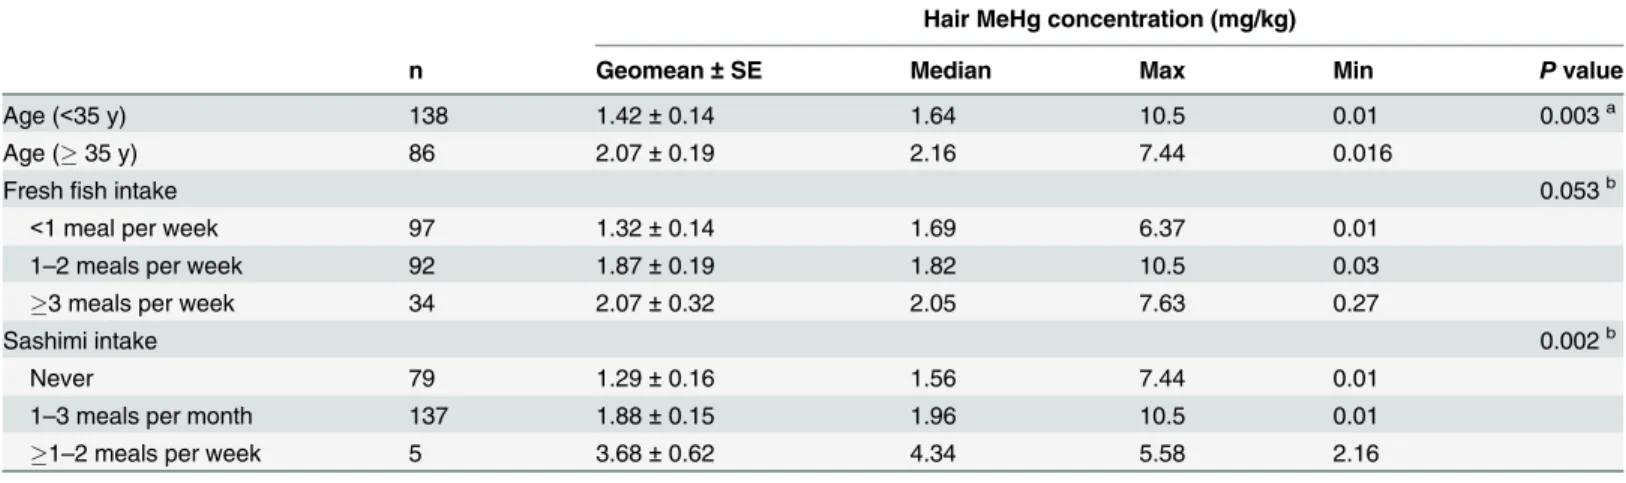 Table 2. Summary of MeHg concentrations in hair, categorized by age and types of fish intake, including fresh fish and sashimi intake.